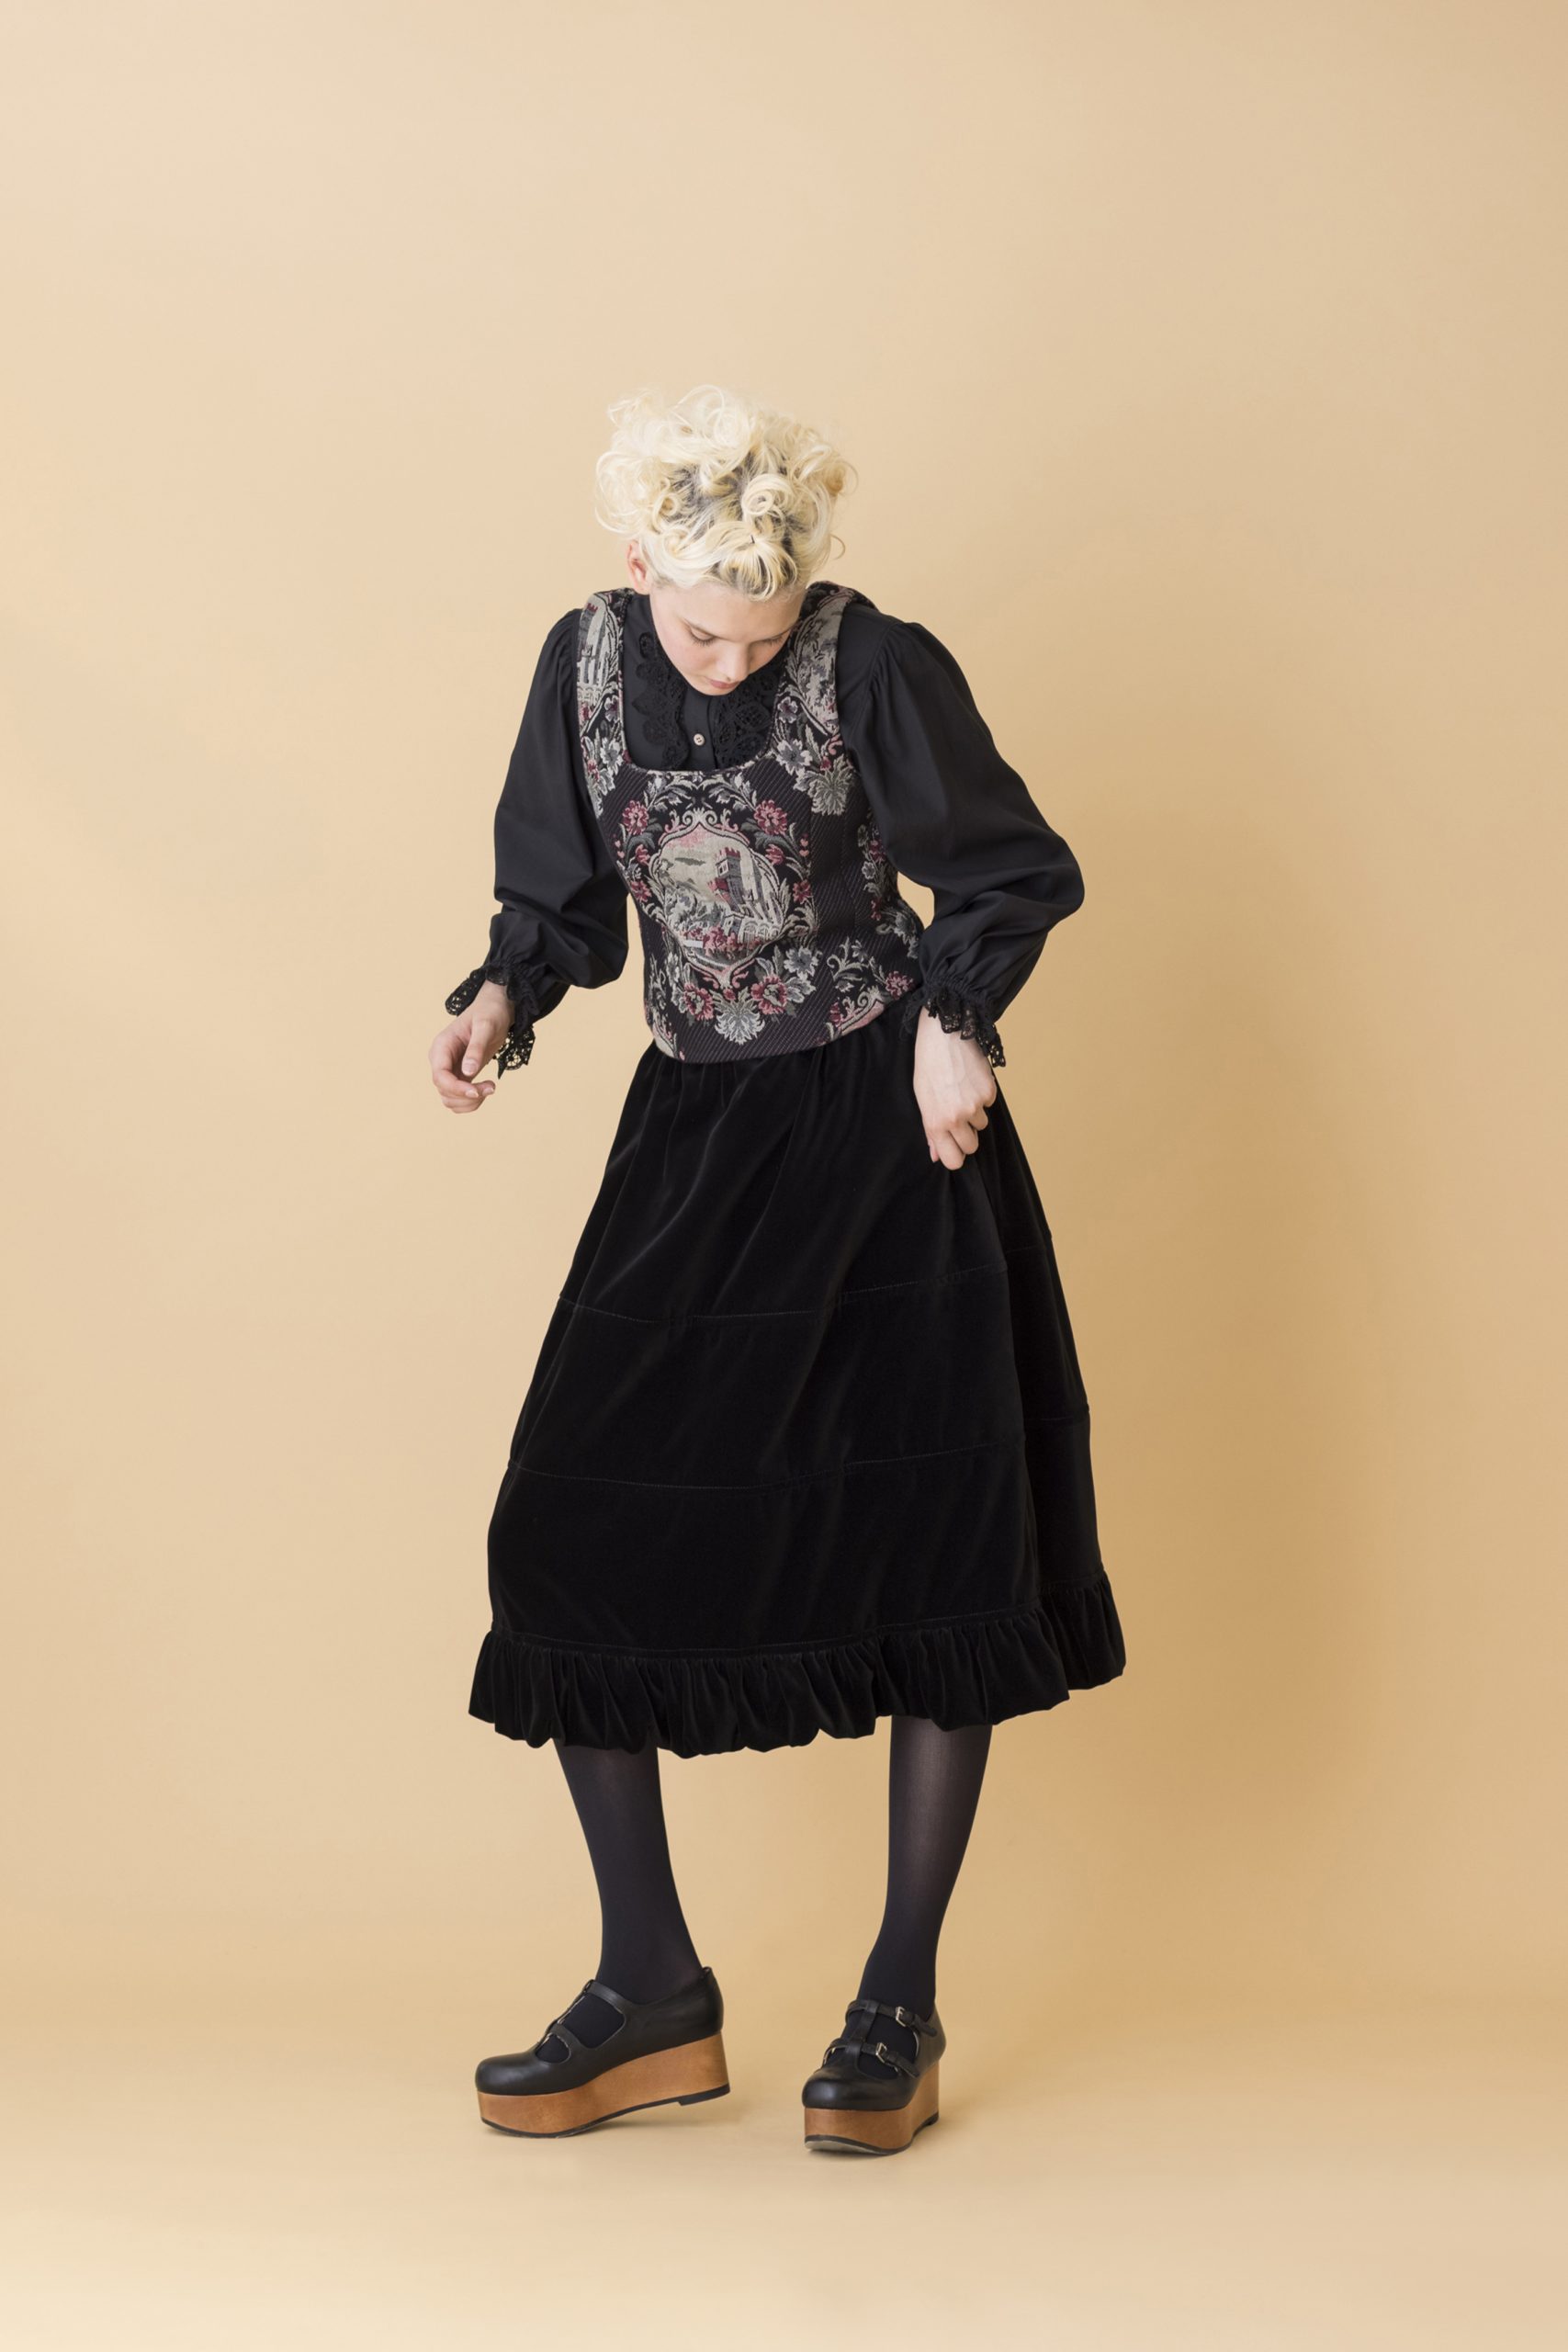 collection 01 | Jane Marple Official Web Site | St.Mary Mead